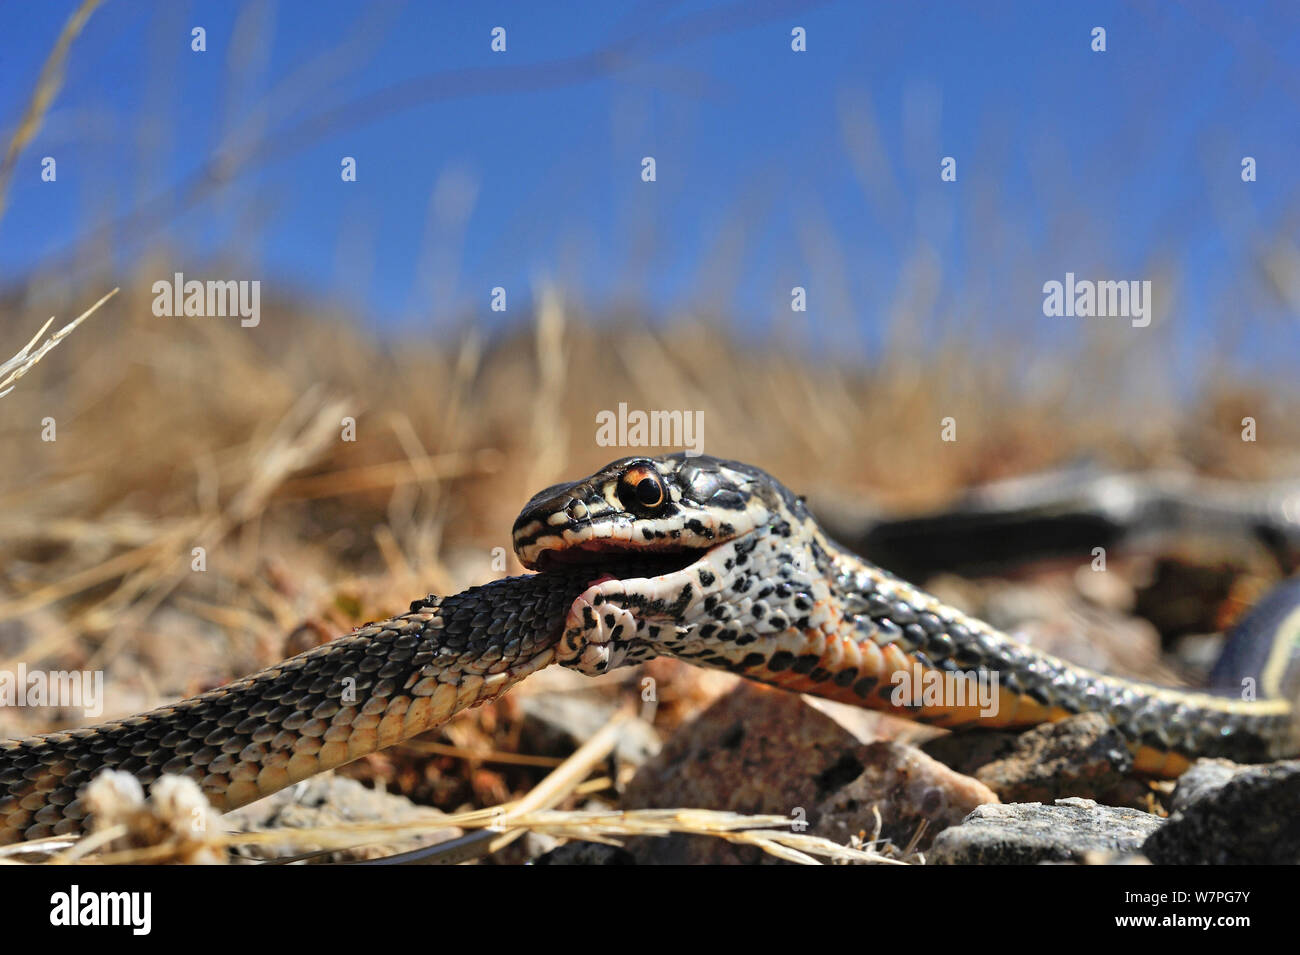 California stripped Racer (Masticophis lateralis) eating a Patch-Nosed Snake (Salvadora hexalepis) Joshua's tree National Monument, California, USA, May Controlled conditions Stock Photo